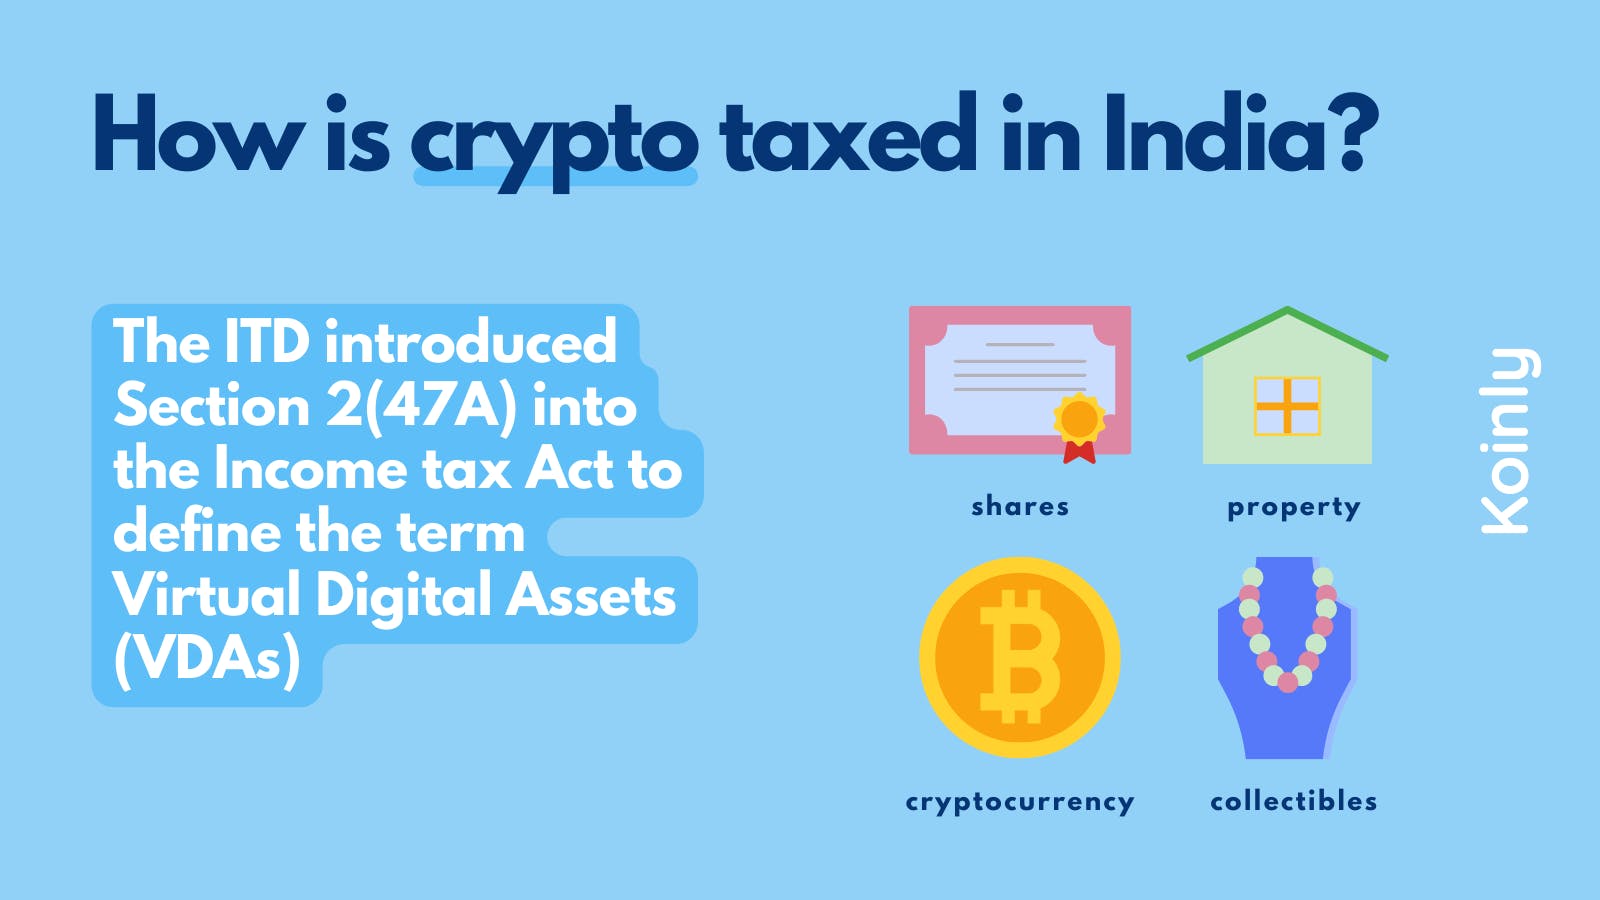 How is crypto taxed in India